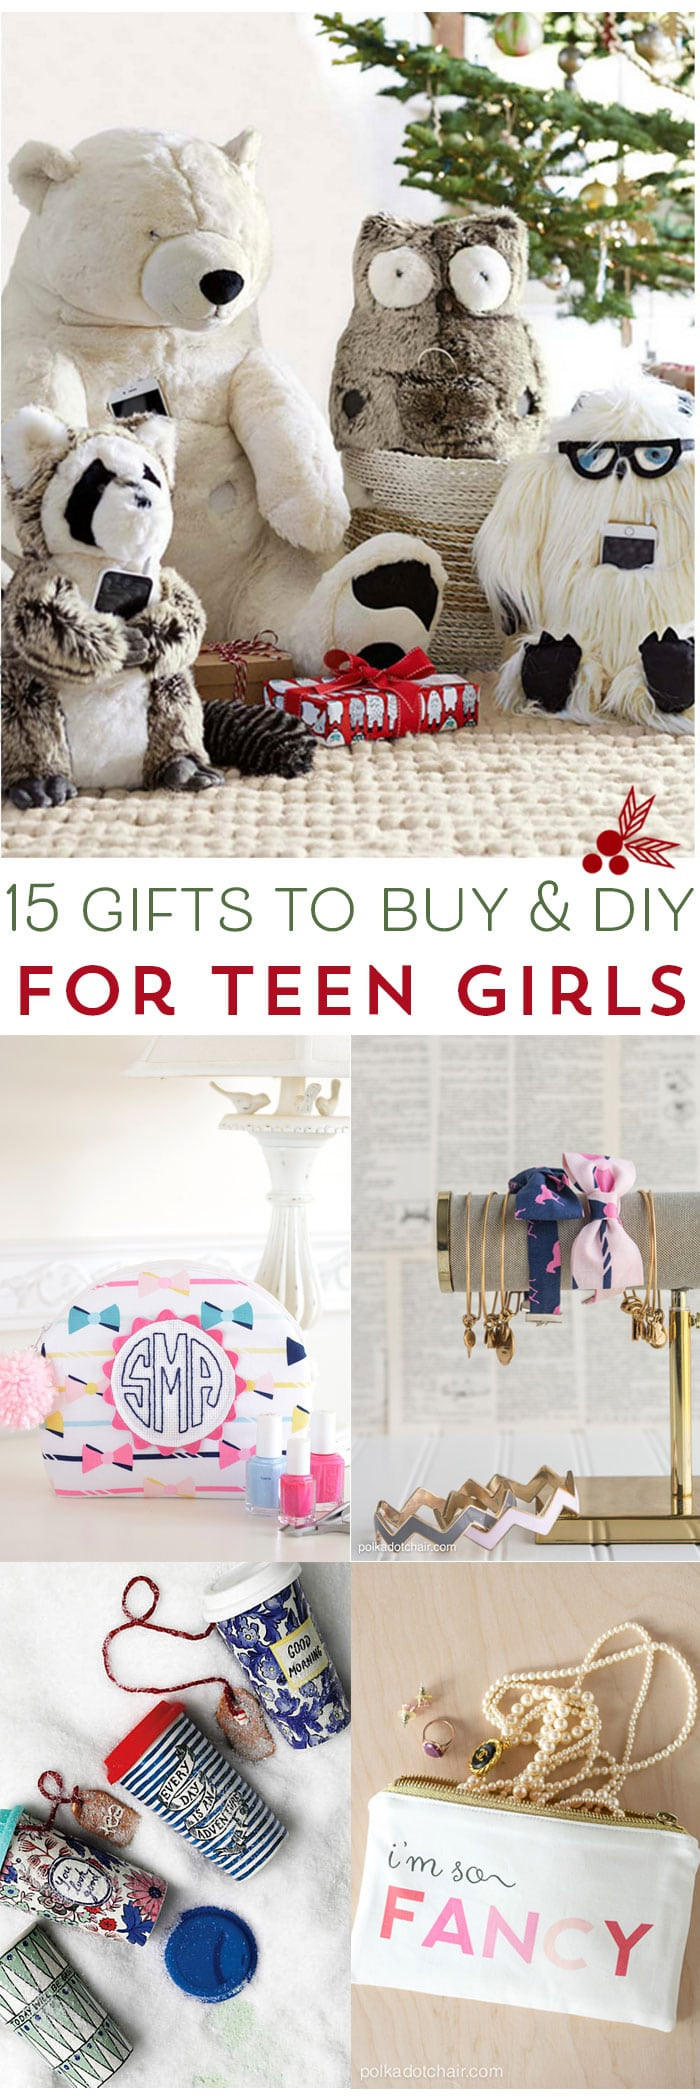 DIY Gift For Girls
 15 Gifts for Teen Girls to DIY and Buy The Polka Dot Chair